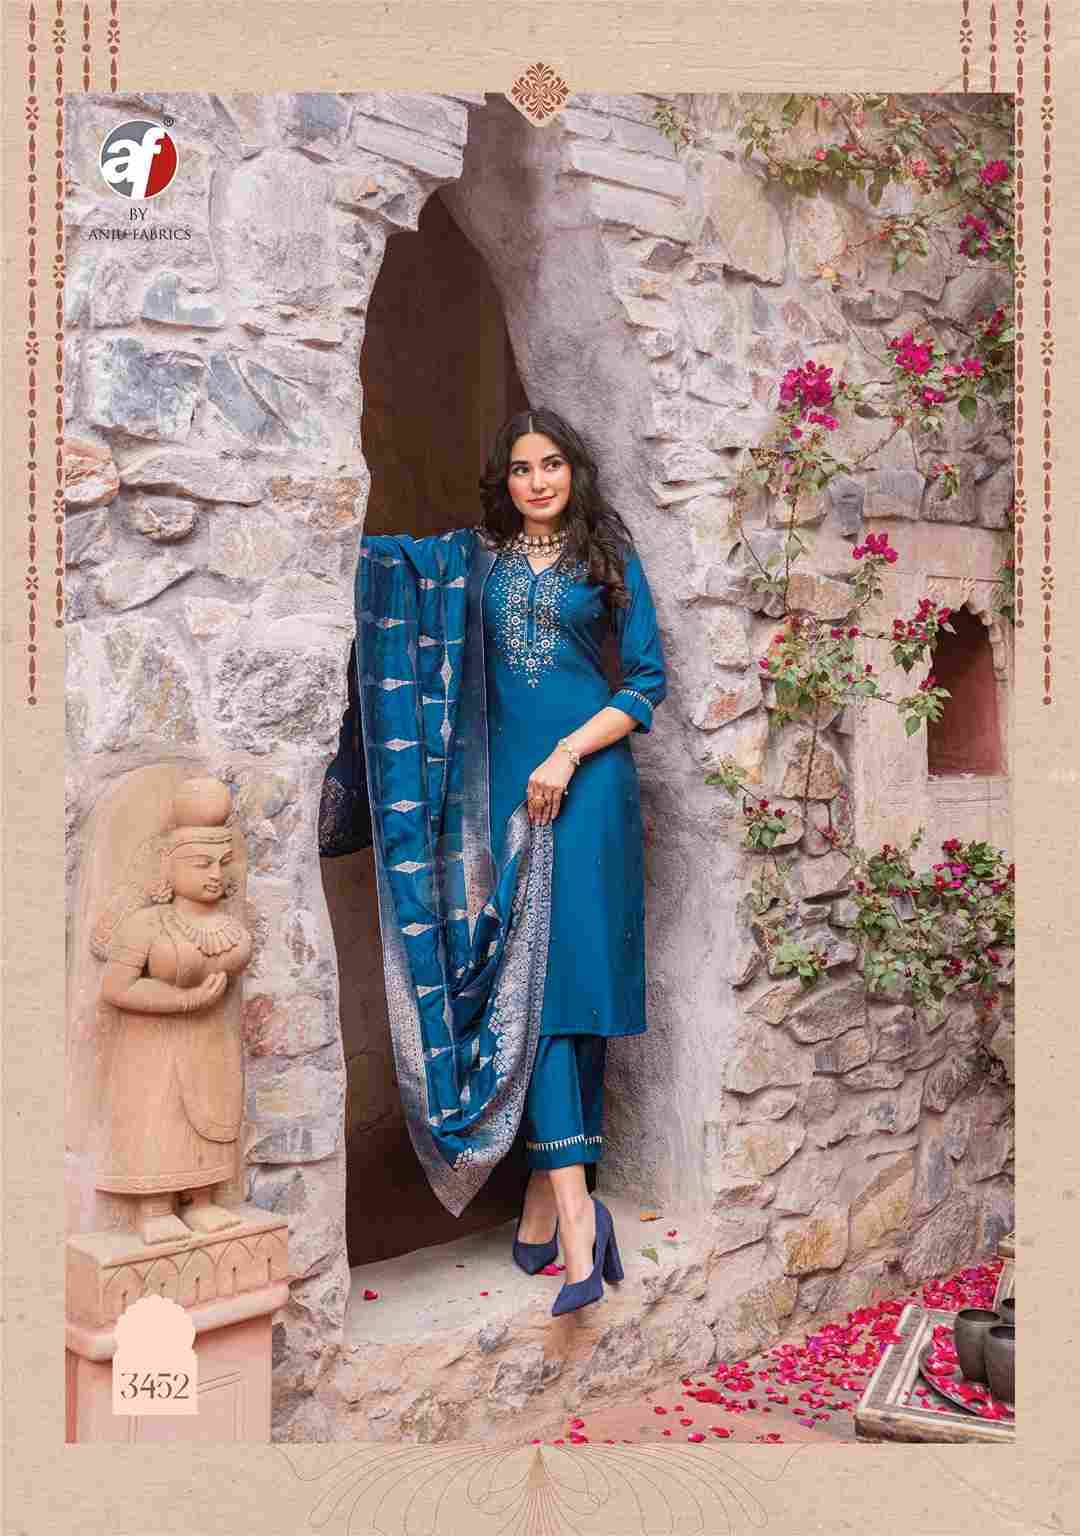 Mayuri Vol-4 By Anju Fabrics 3451 To 3456 Series Designer Festive Suits Collection Beautiful Stylish Fancy Colorful Party Wear & Occasional Wear Viscose Nylon Dresses At Wholesale Price